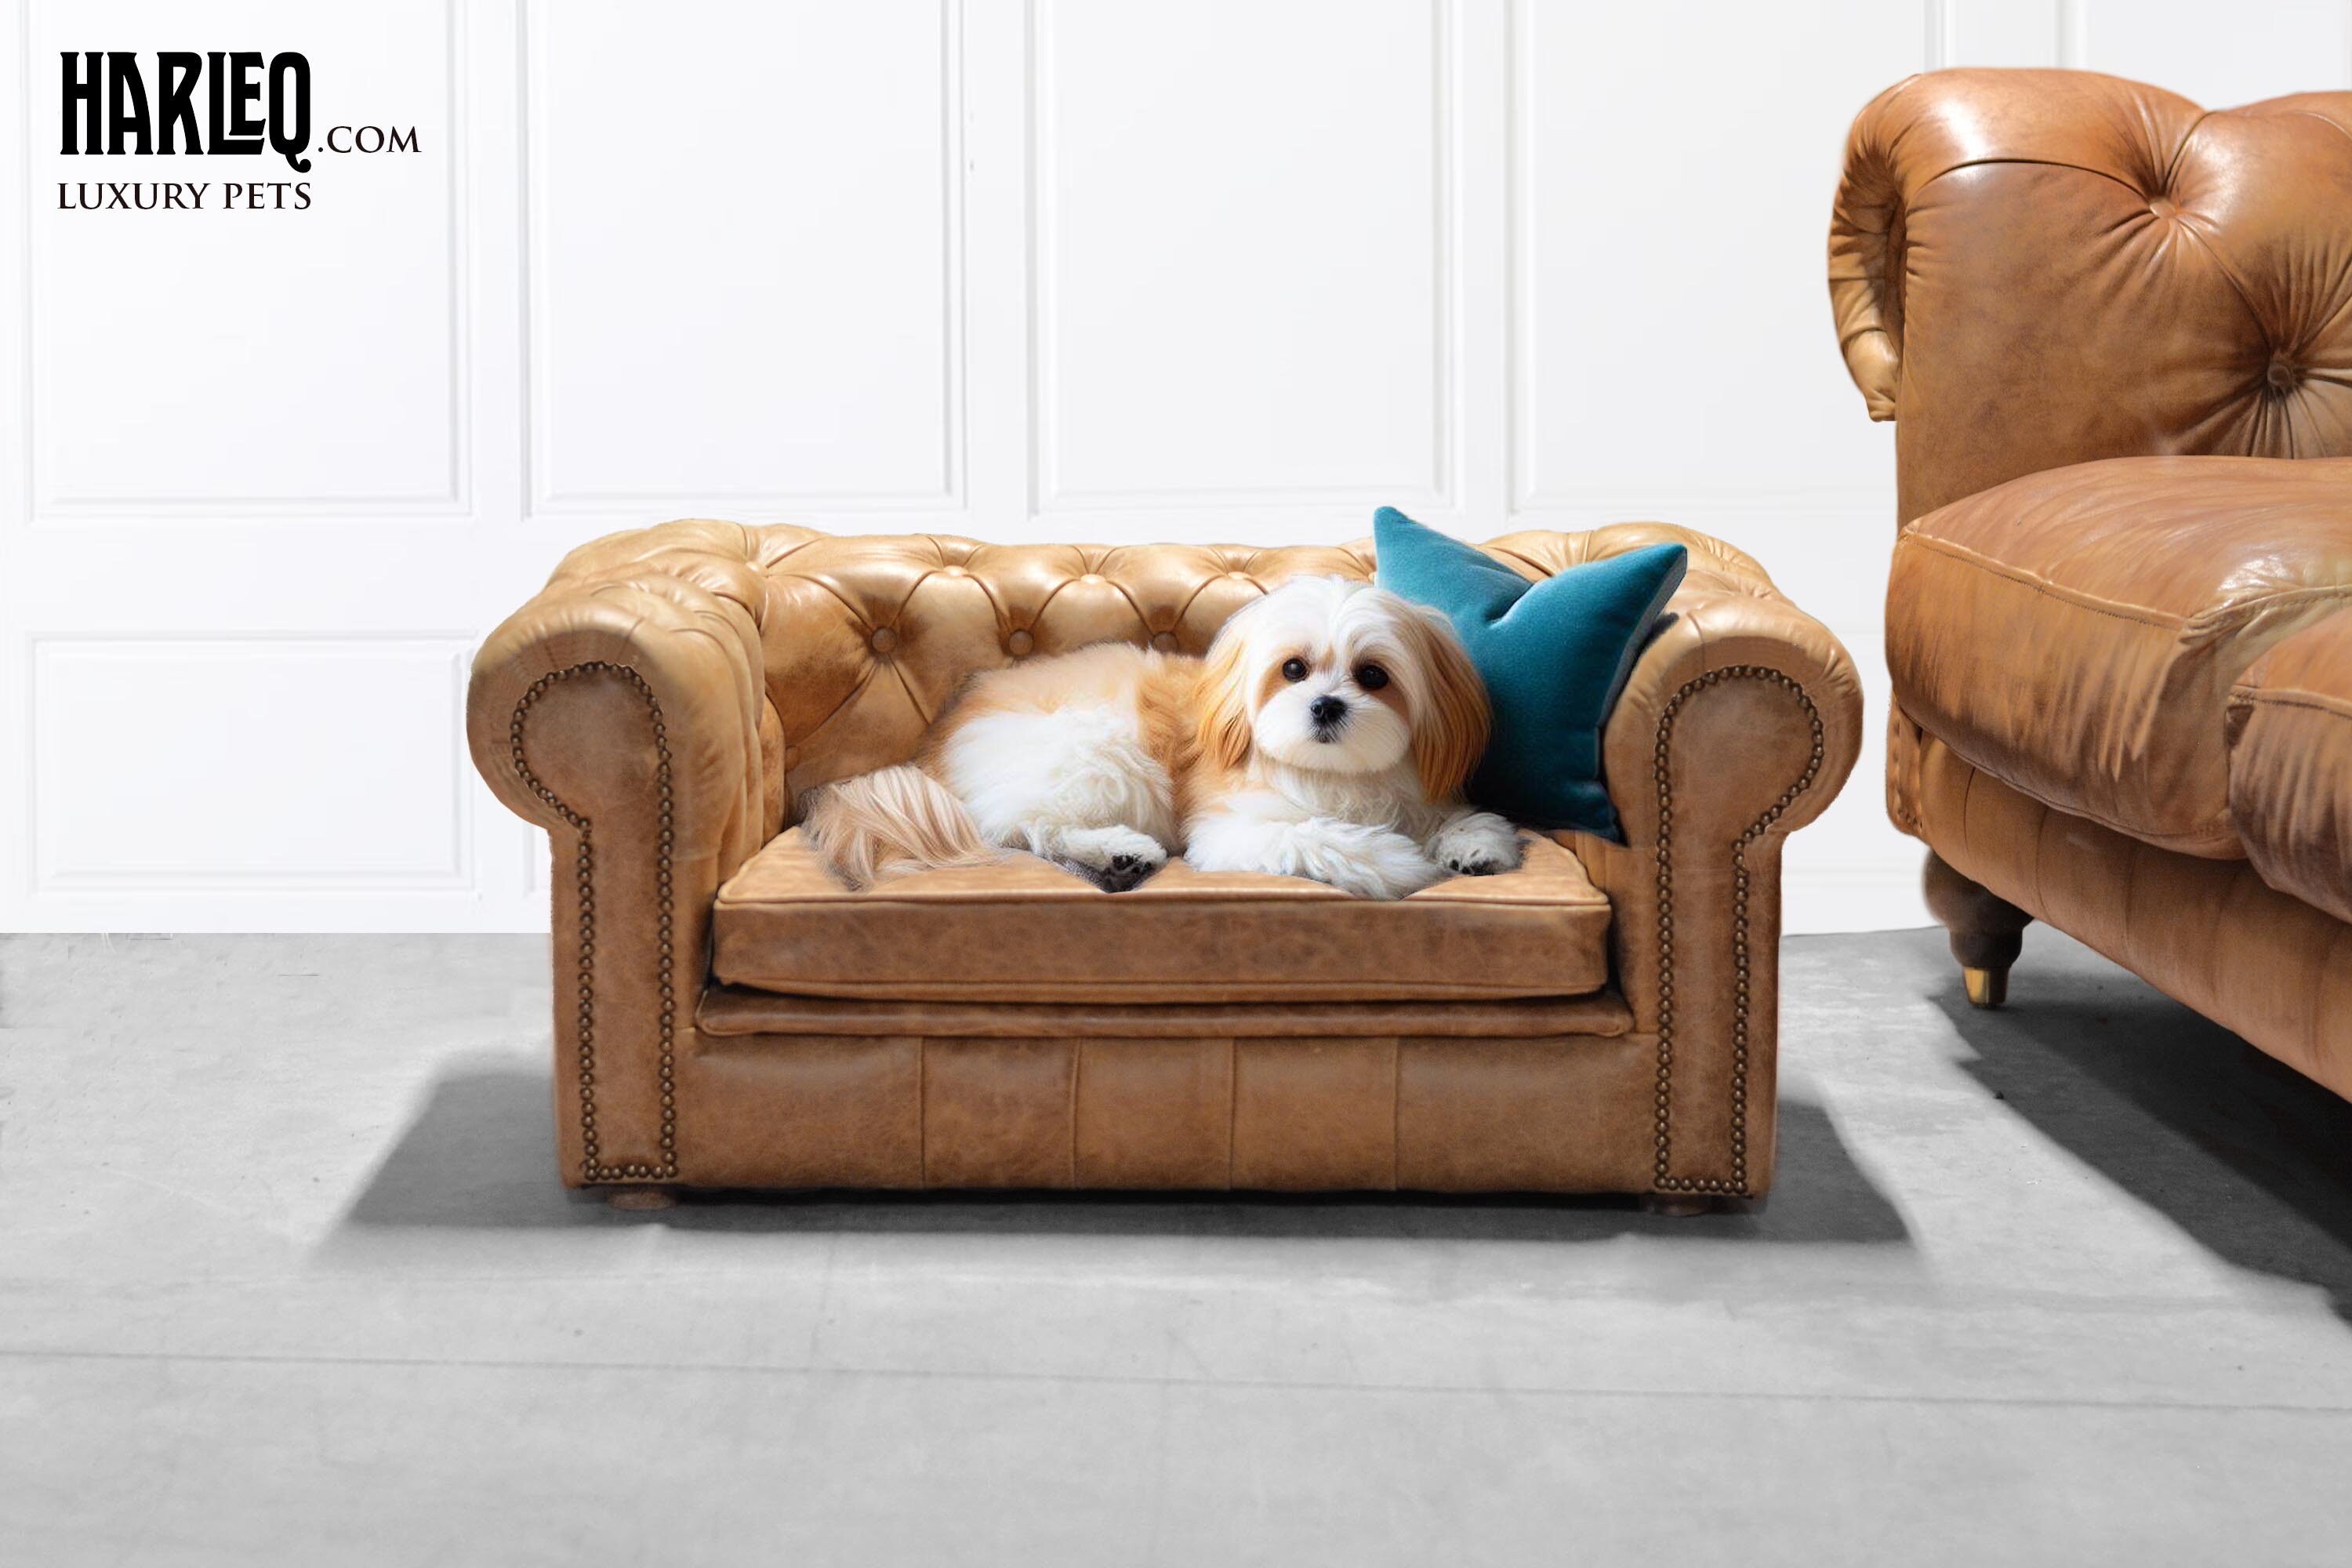 dog bed sofa couch pet collection leather harleq